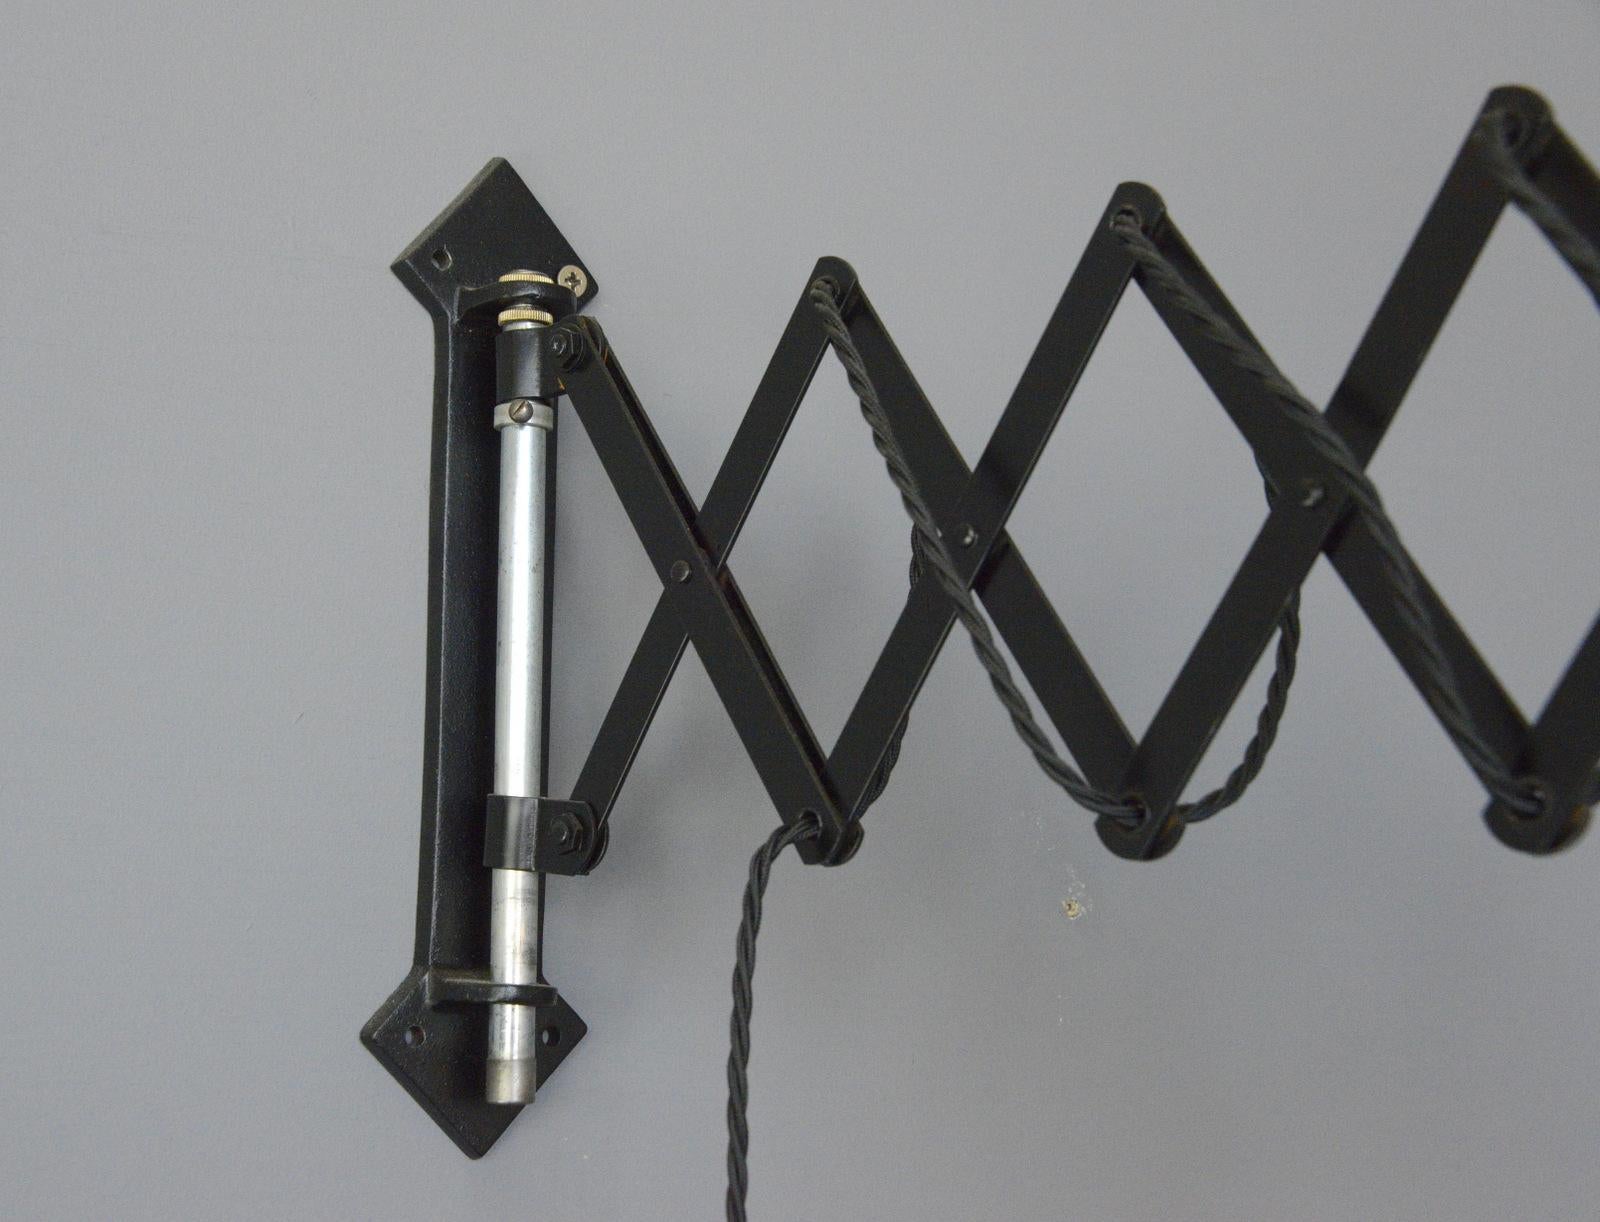 Industrial scissor lamp circa 1930s

- Extendable scissor mechanism 
- Cast iron wall bracket with arrow head design
- Steel shade
- On/Off toggle switch on the shade
- Takes E27 fitting bulbs
- German ~ 1930s
- Measures: 29cm tall x 16cm